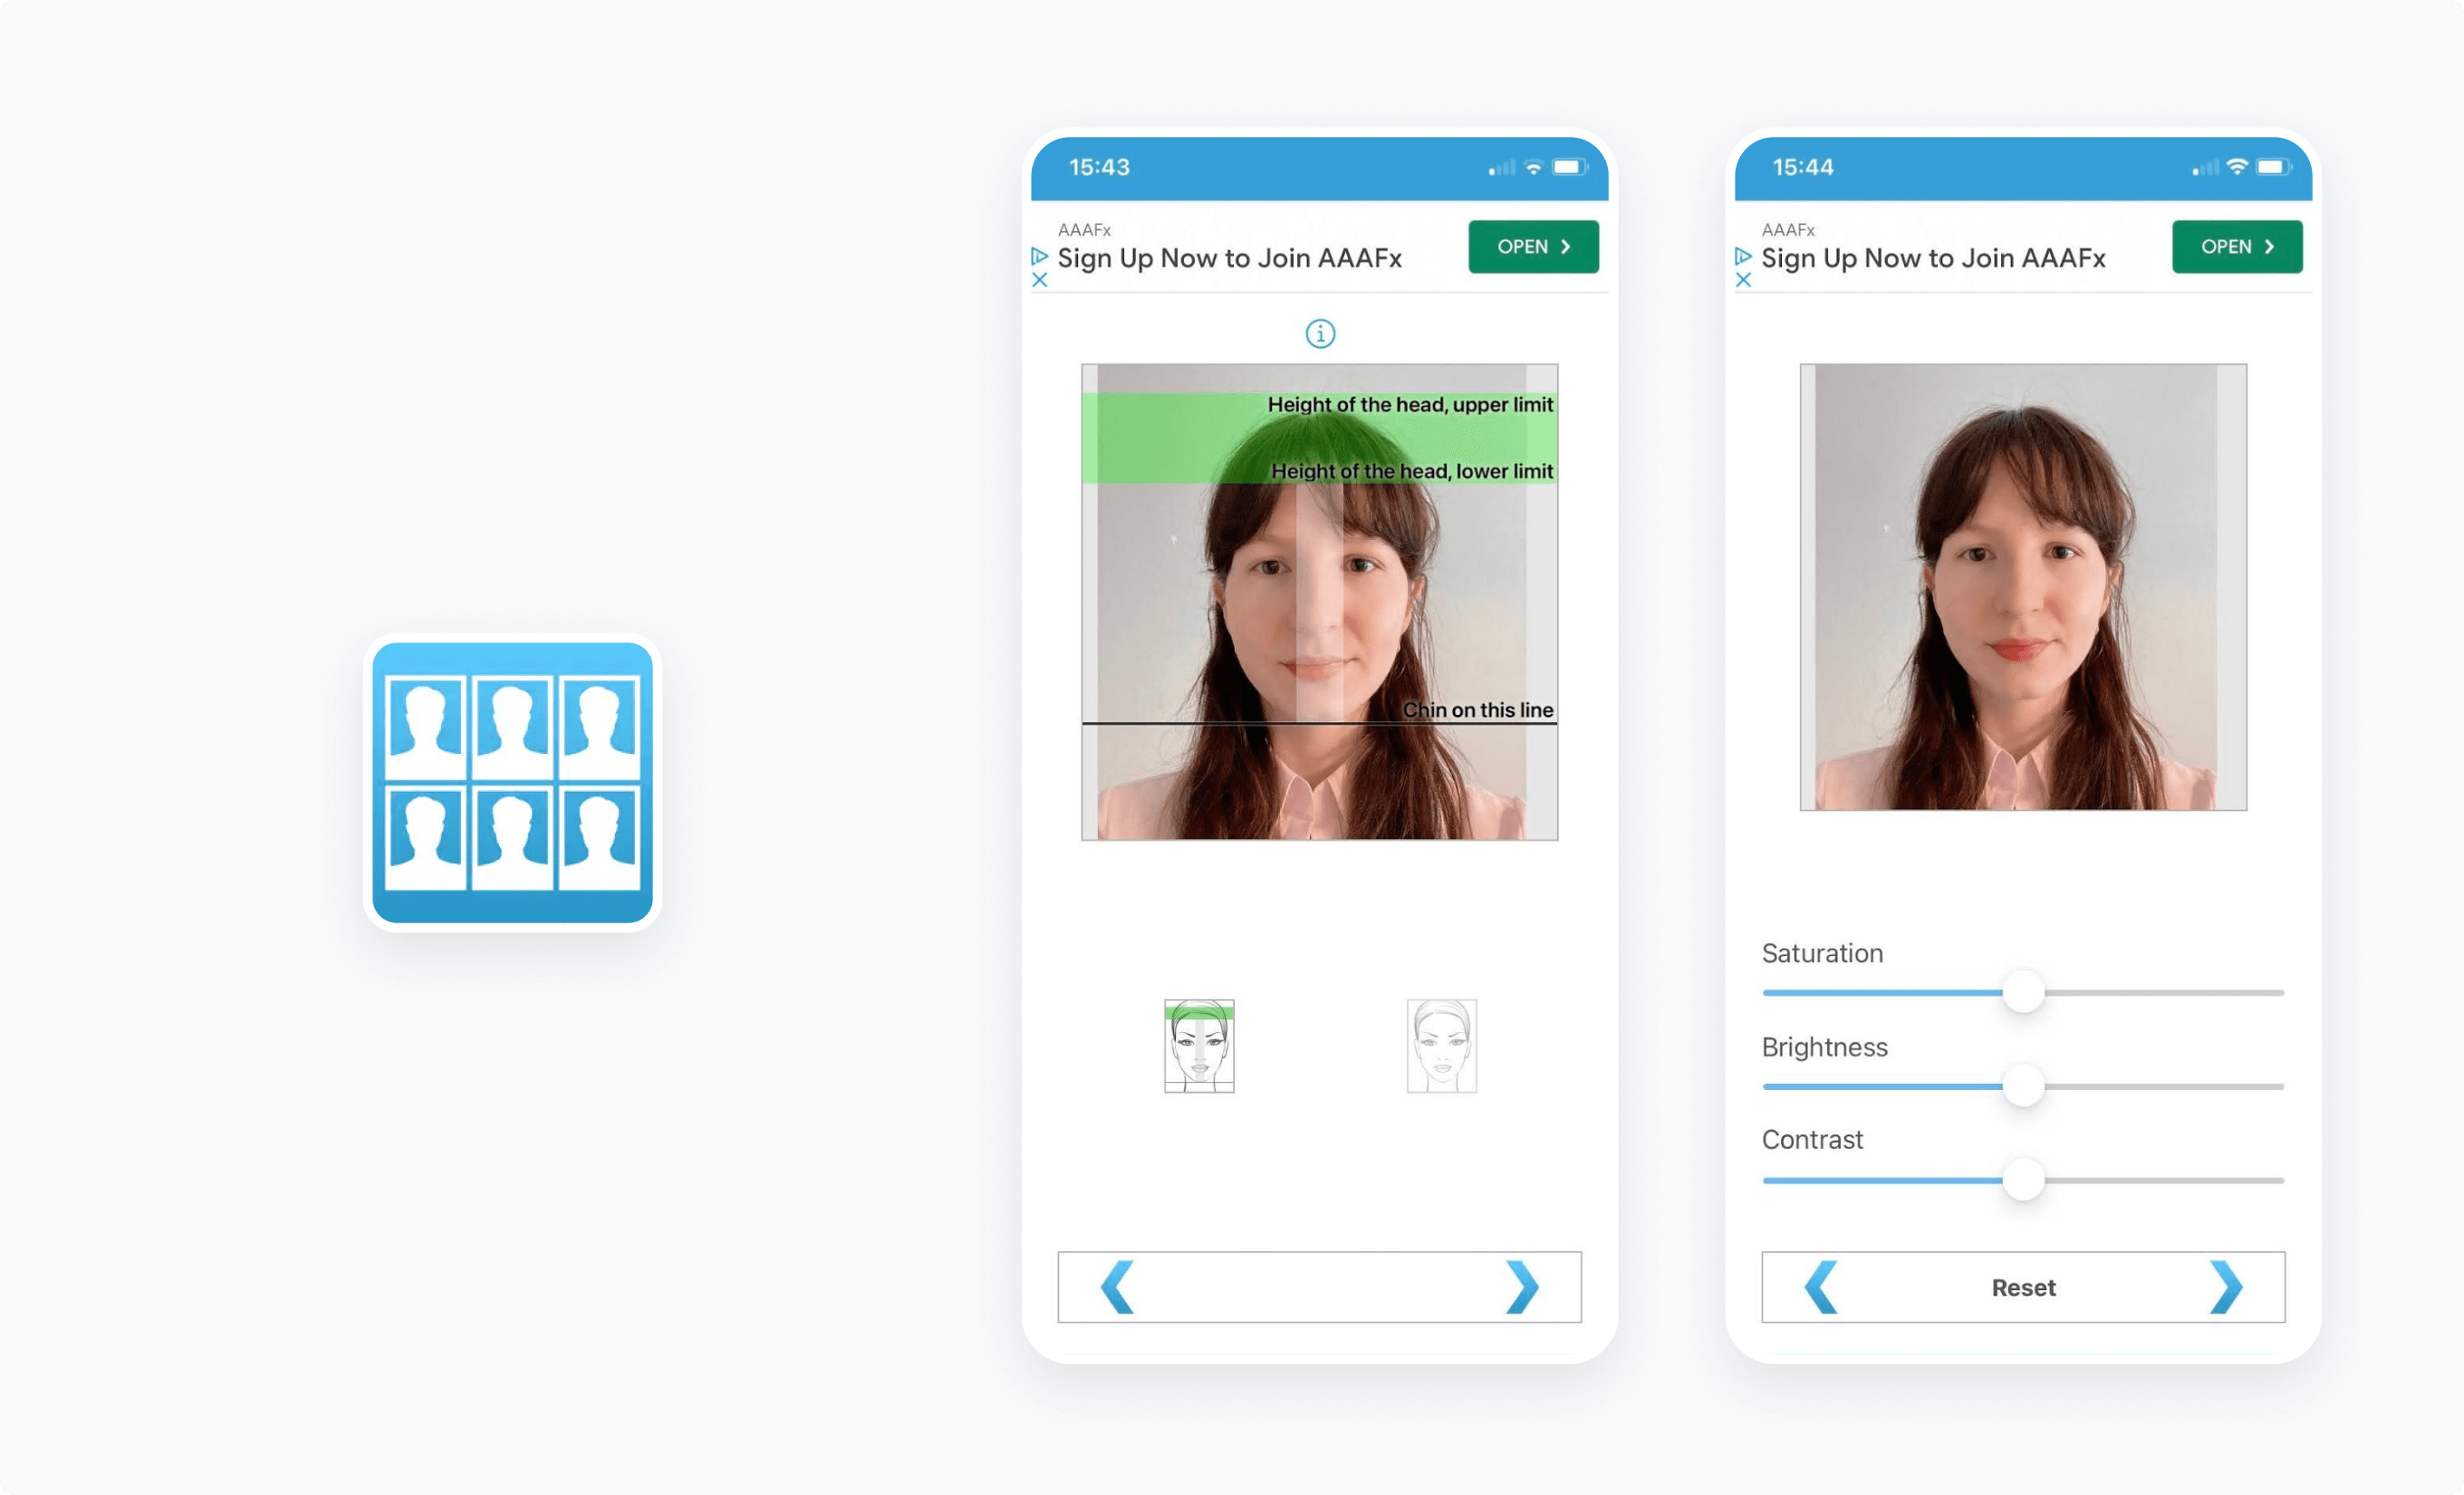 Using a mobile tool to readjust your head to the correct size using on-screen guidelines.